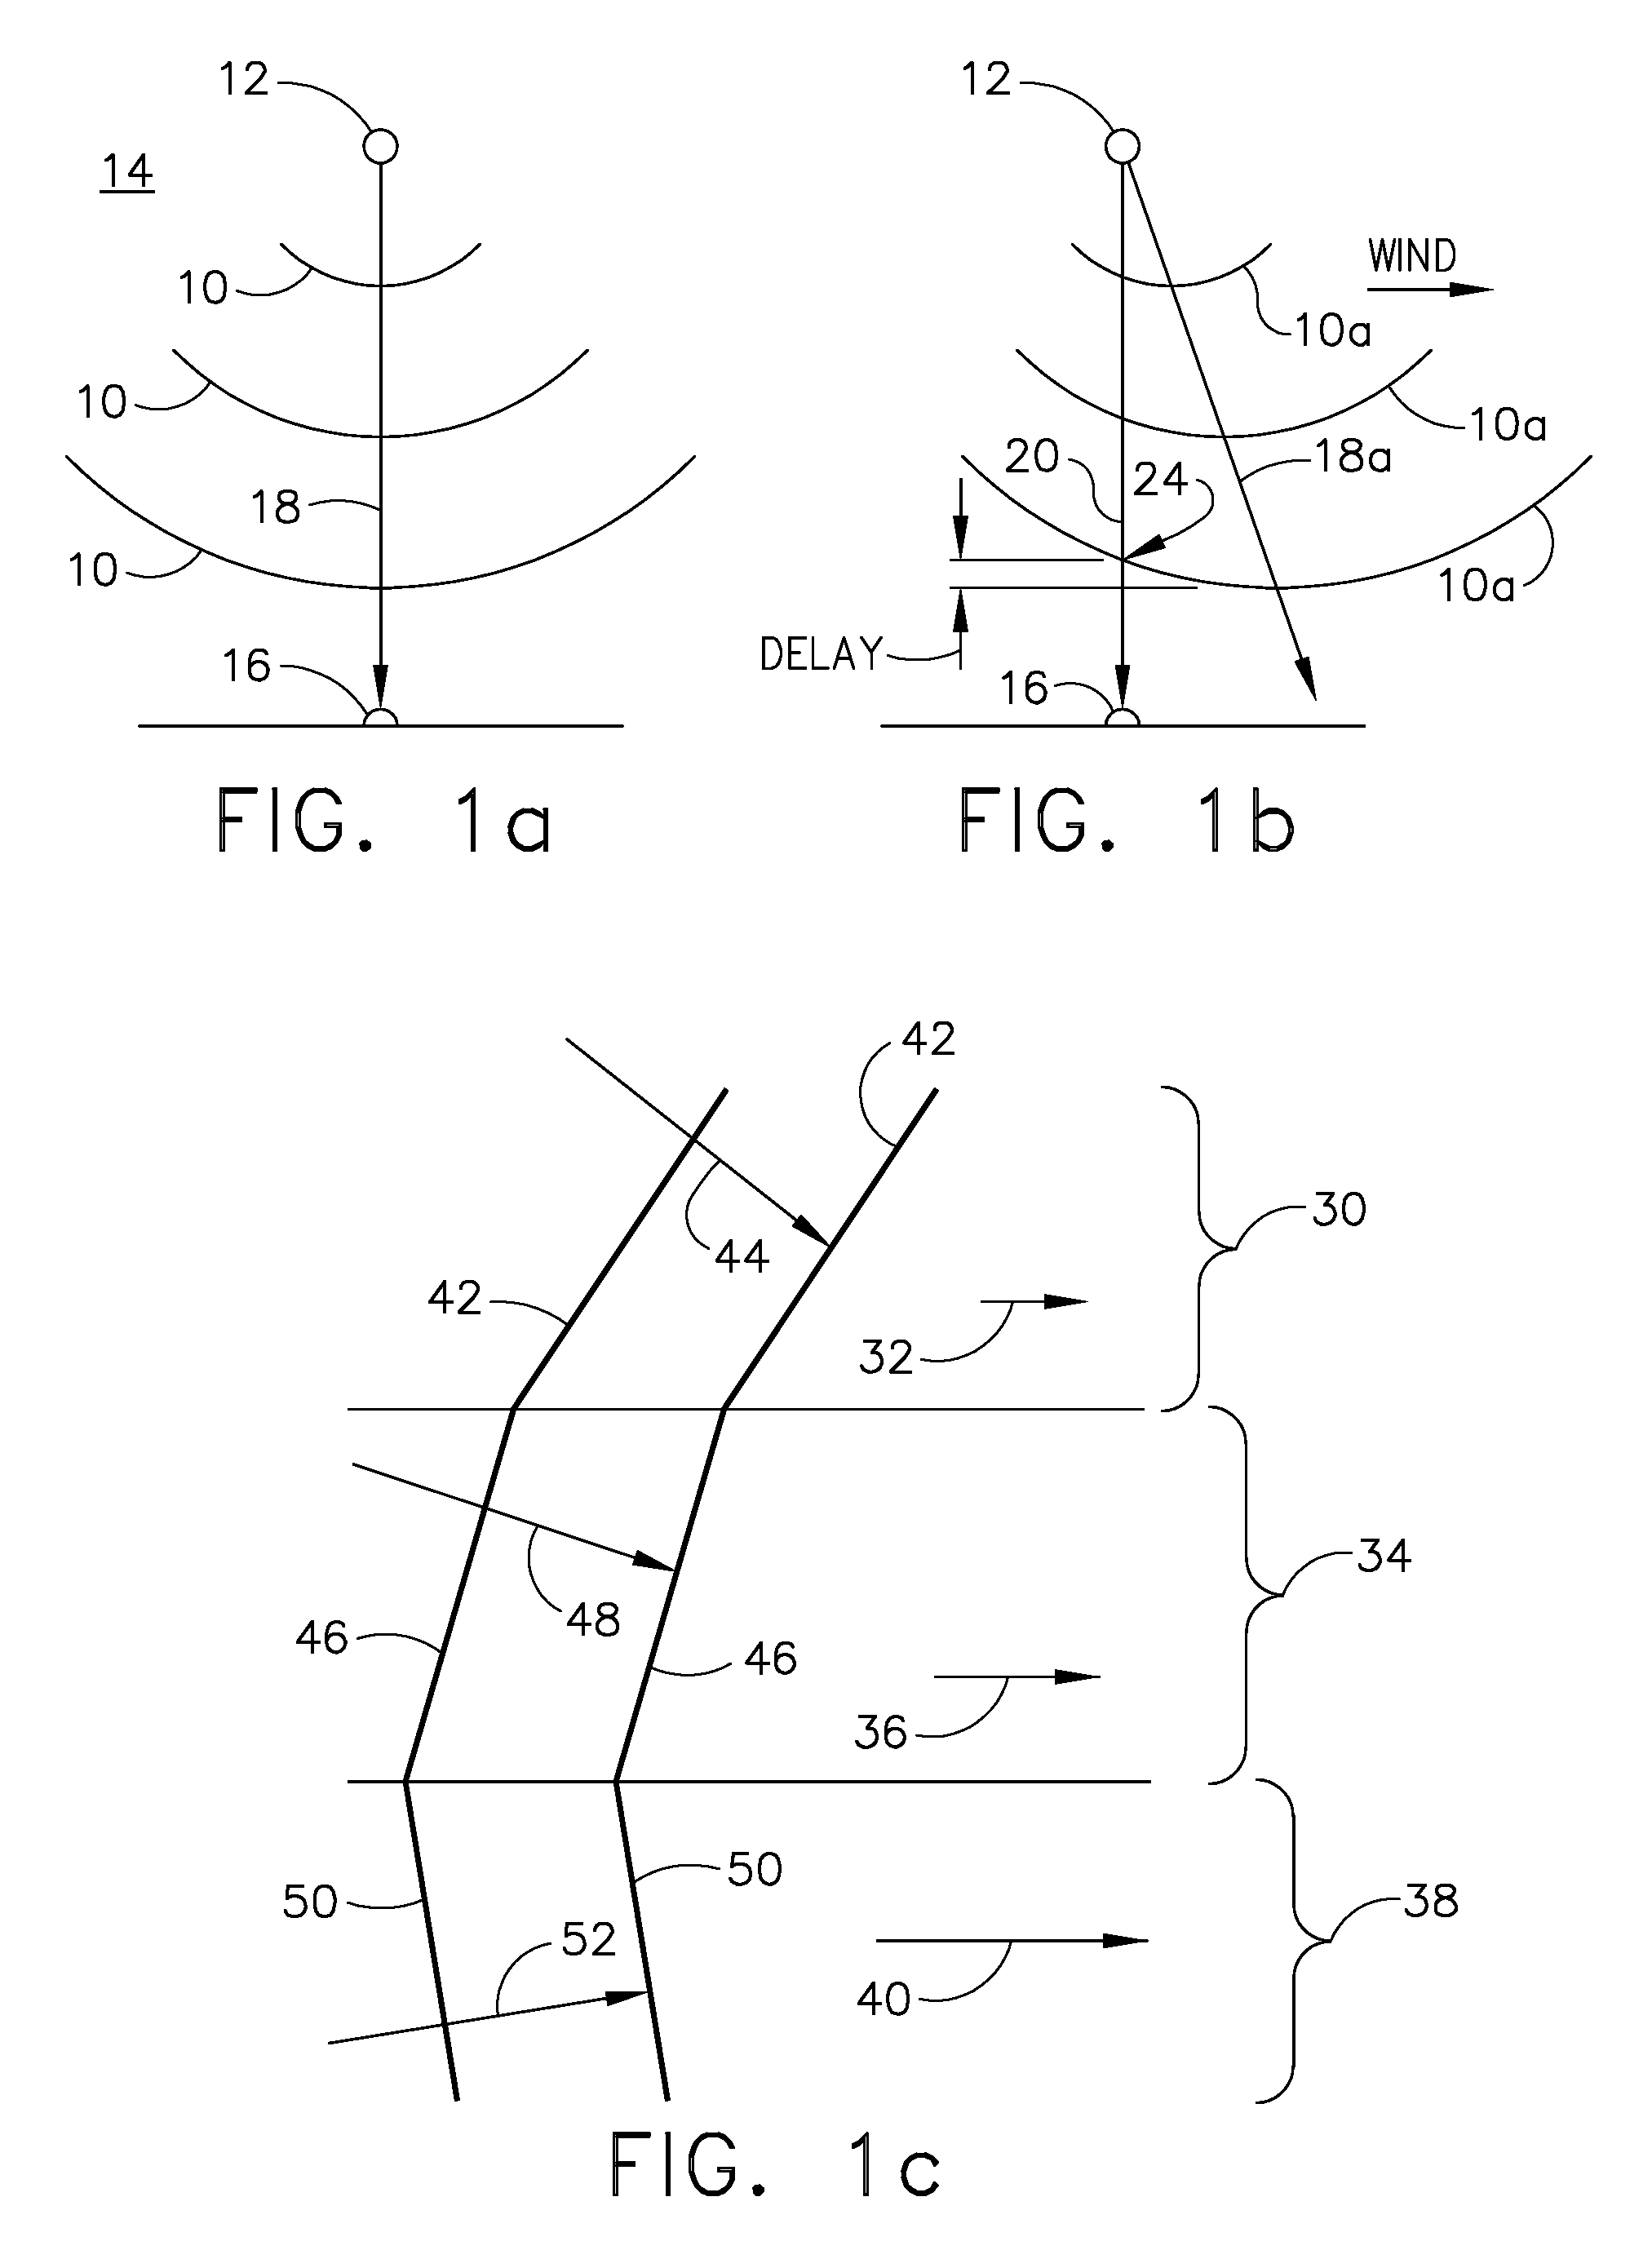 Accoustic profiler for wind, temperature, and turbulence